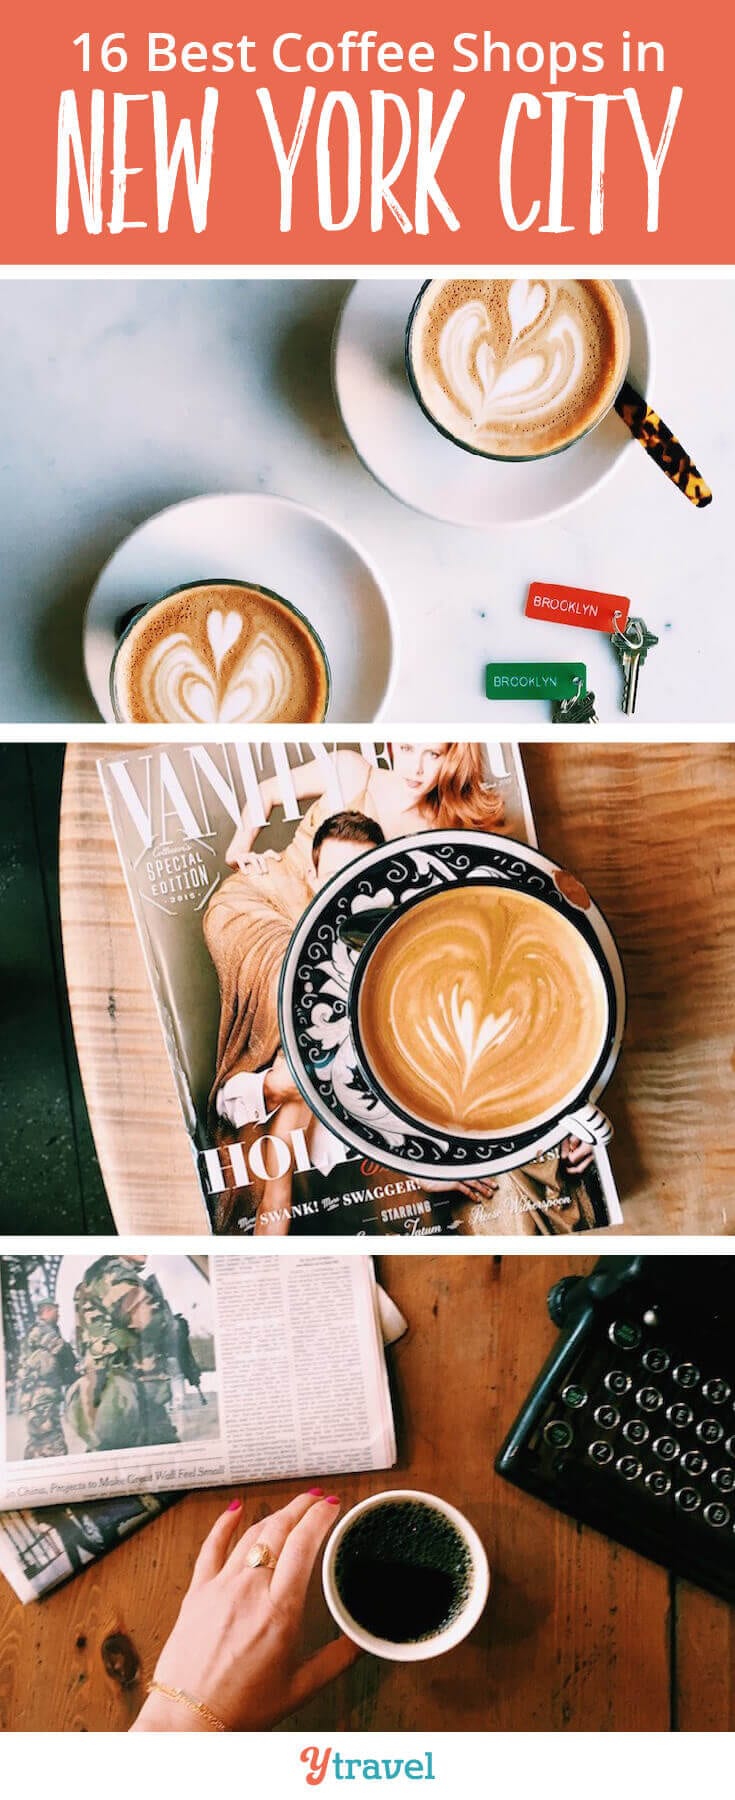 Best coffee shops in NYC. Want to drink coffee with the locals in New York City? Skip the chains and check out these 14 coffee shops in NYC that the locals love!